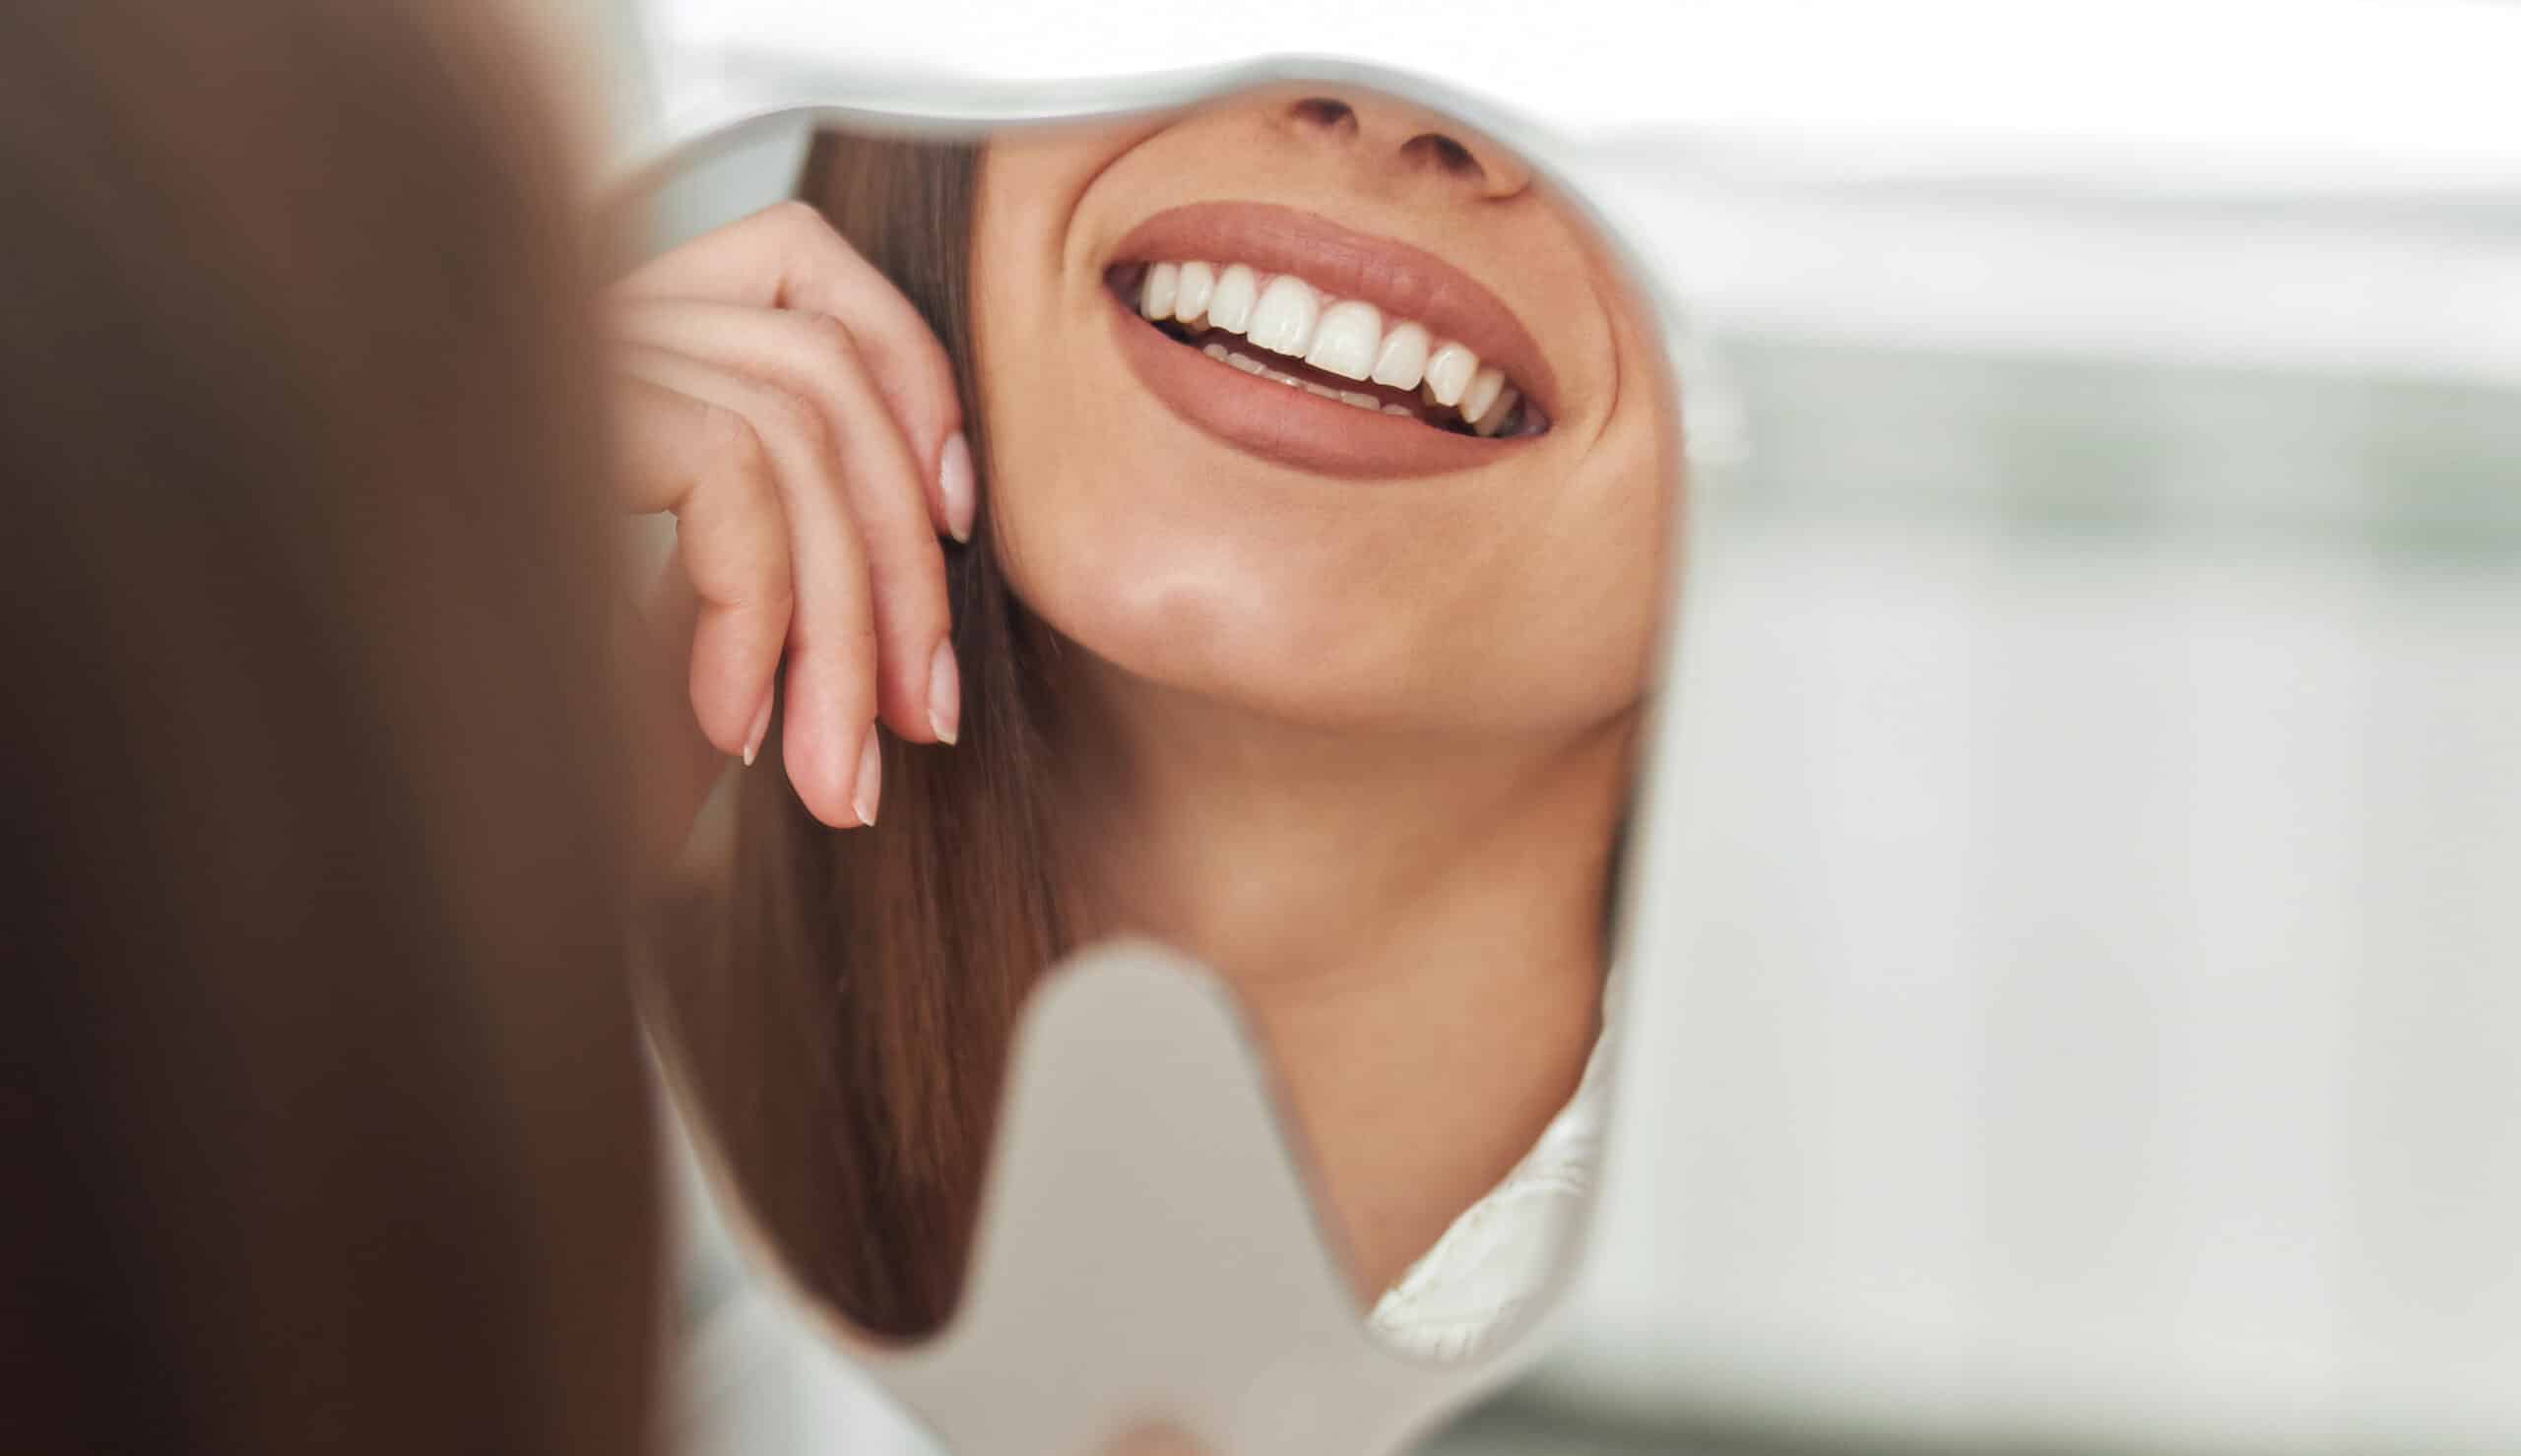 Cosmetic Dentistry in Las Vegas NV Dental Implants in Las Vegas Dentist in Las Vegas, NV. Wagner Dental offers Invisalign, general, emergency dentistry and more in NV 89134 Call: 702-878-5599